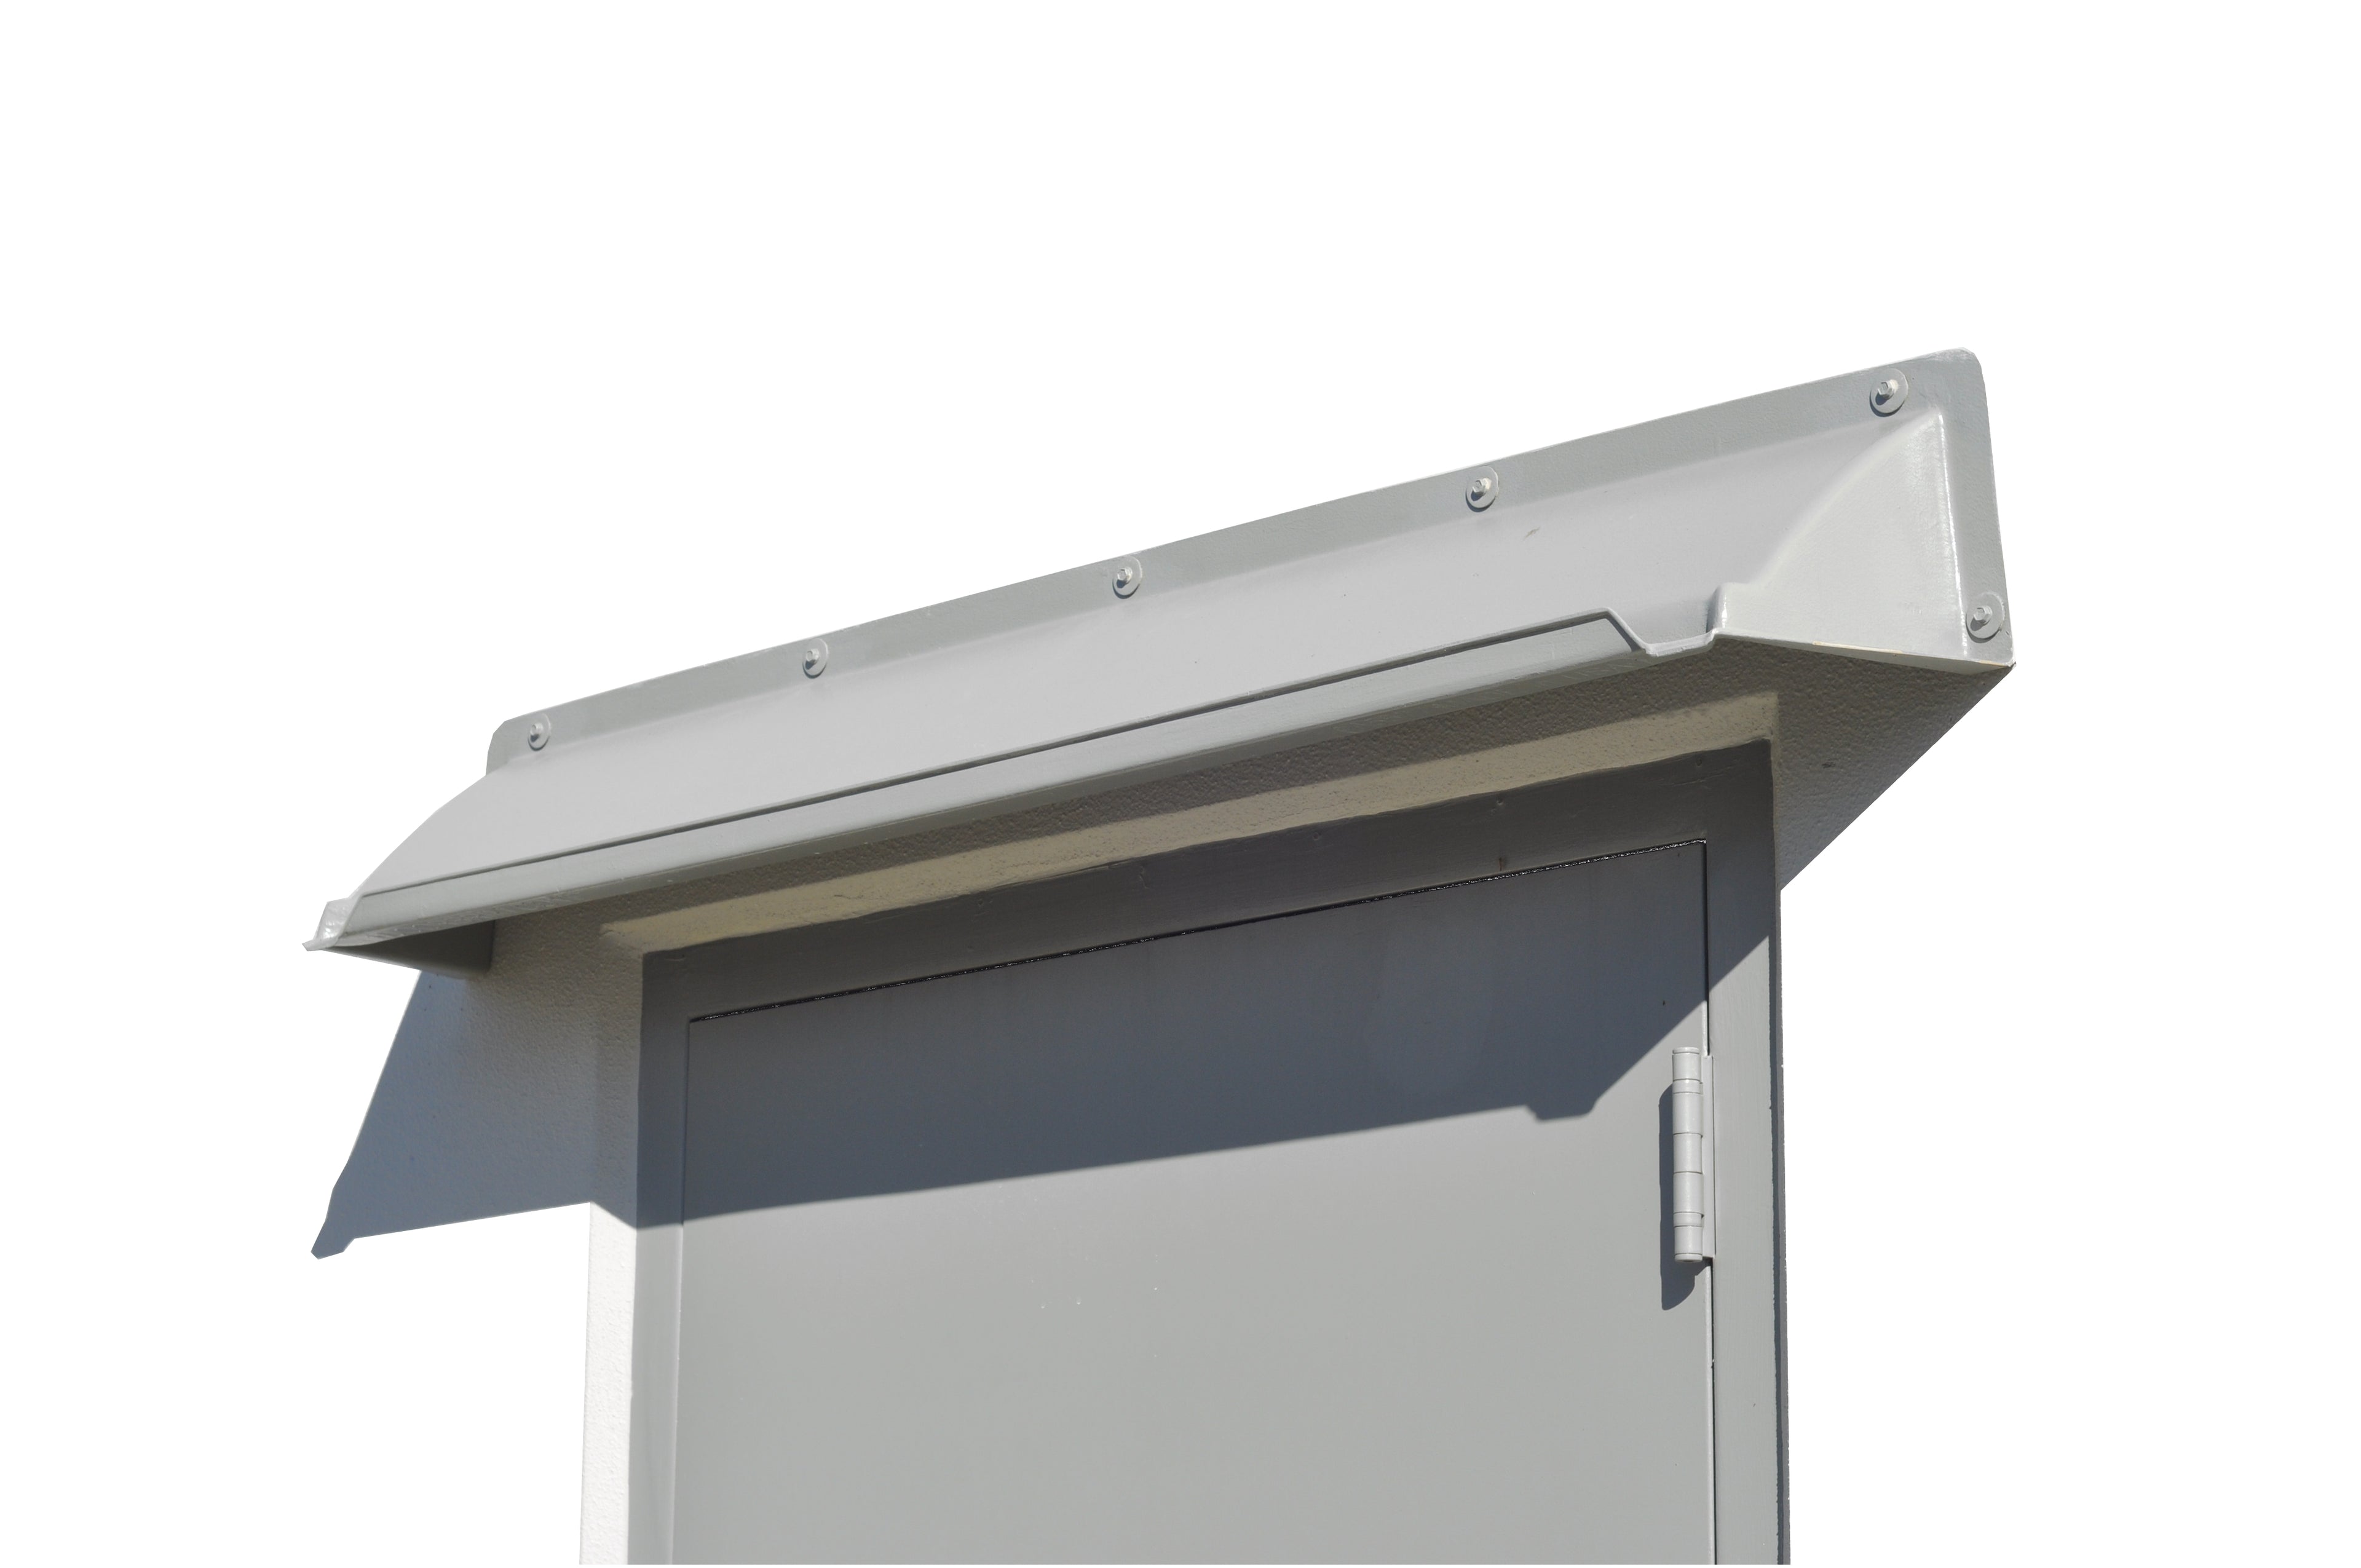 Gray rain diverter mounted above a gray hollow metal door with white background.